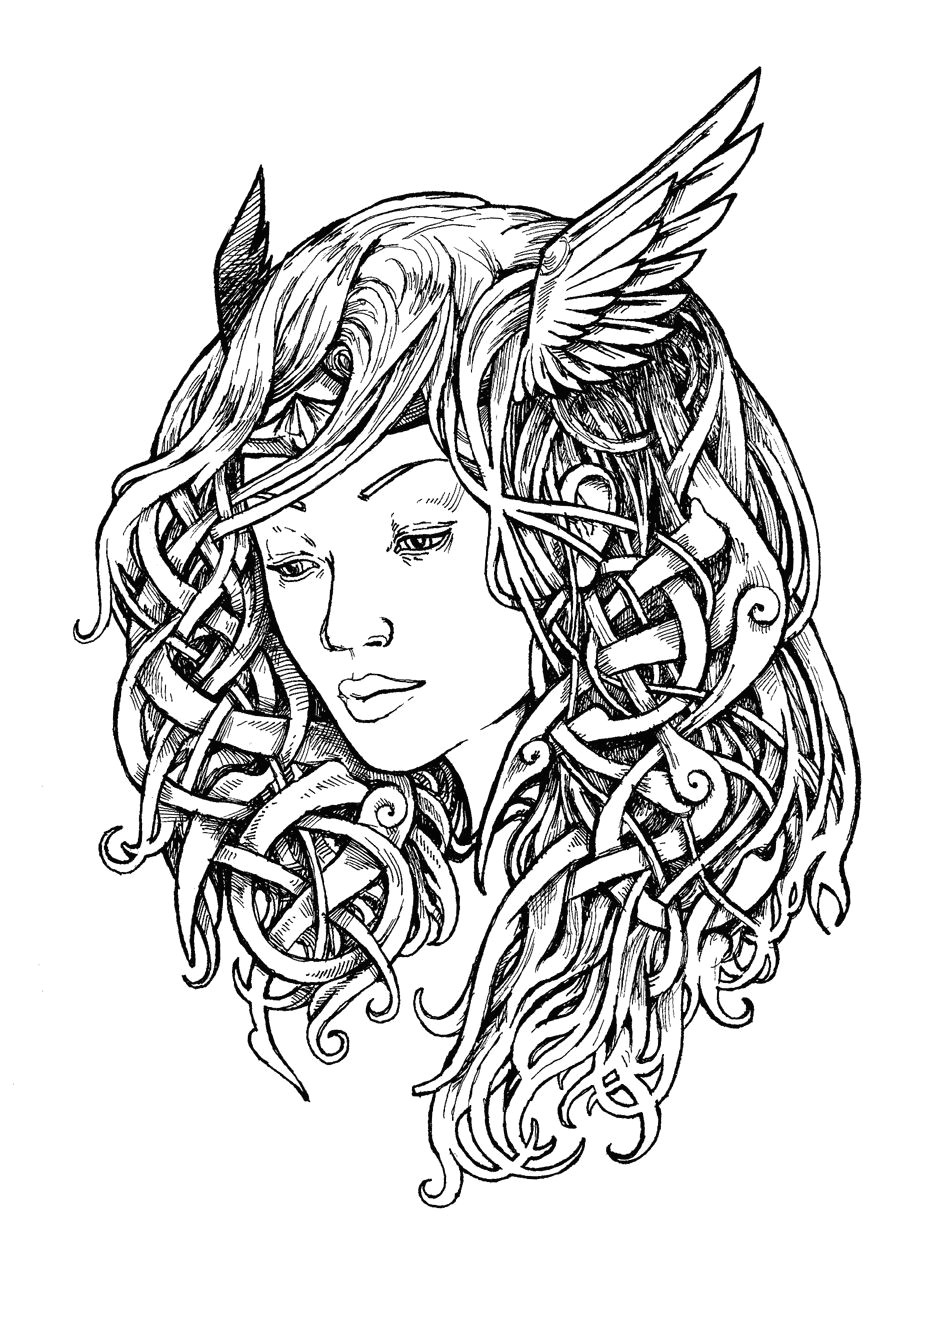 easy to draw celtic designs vikings tattos valkyrie aa tattoos i d love to have of easy